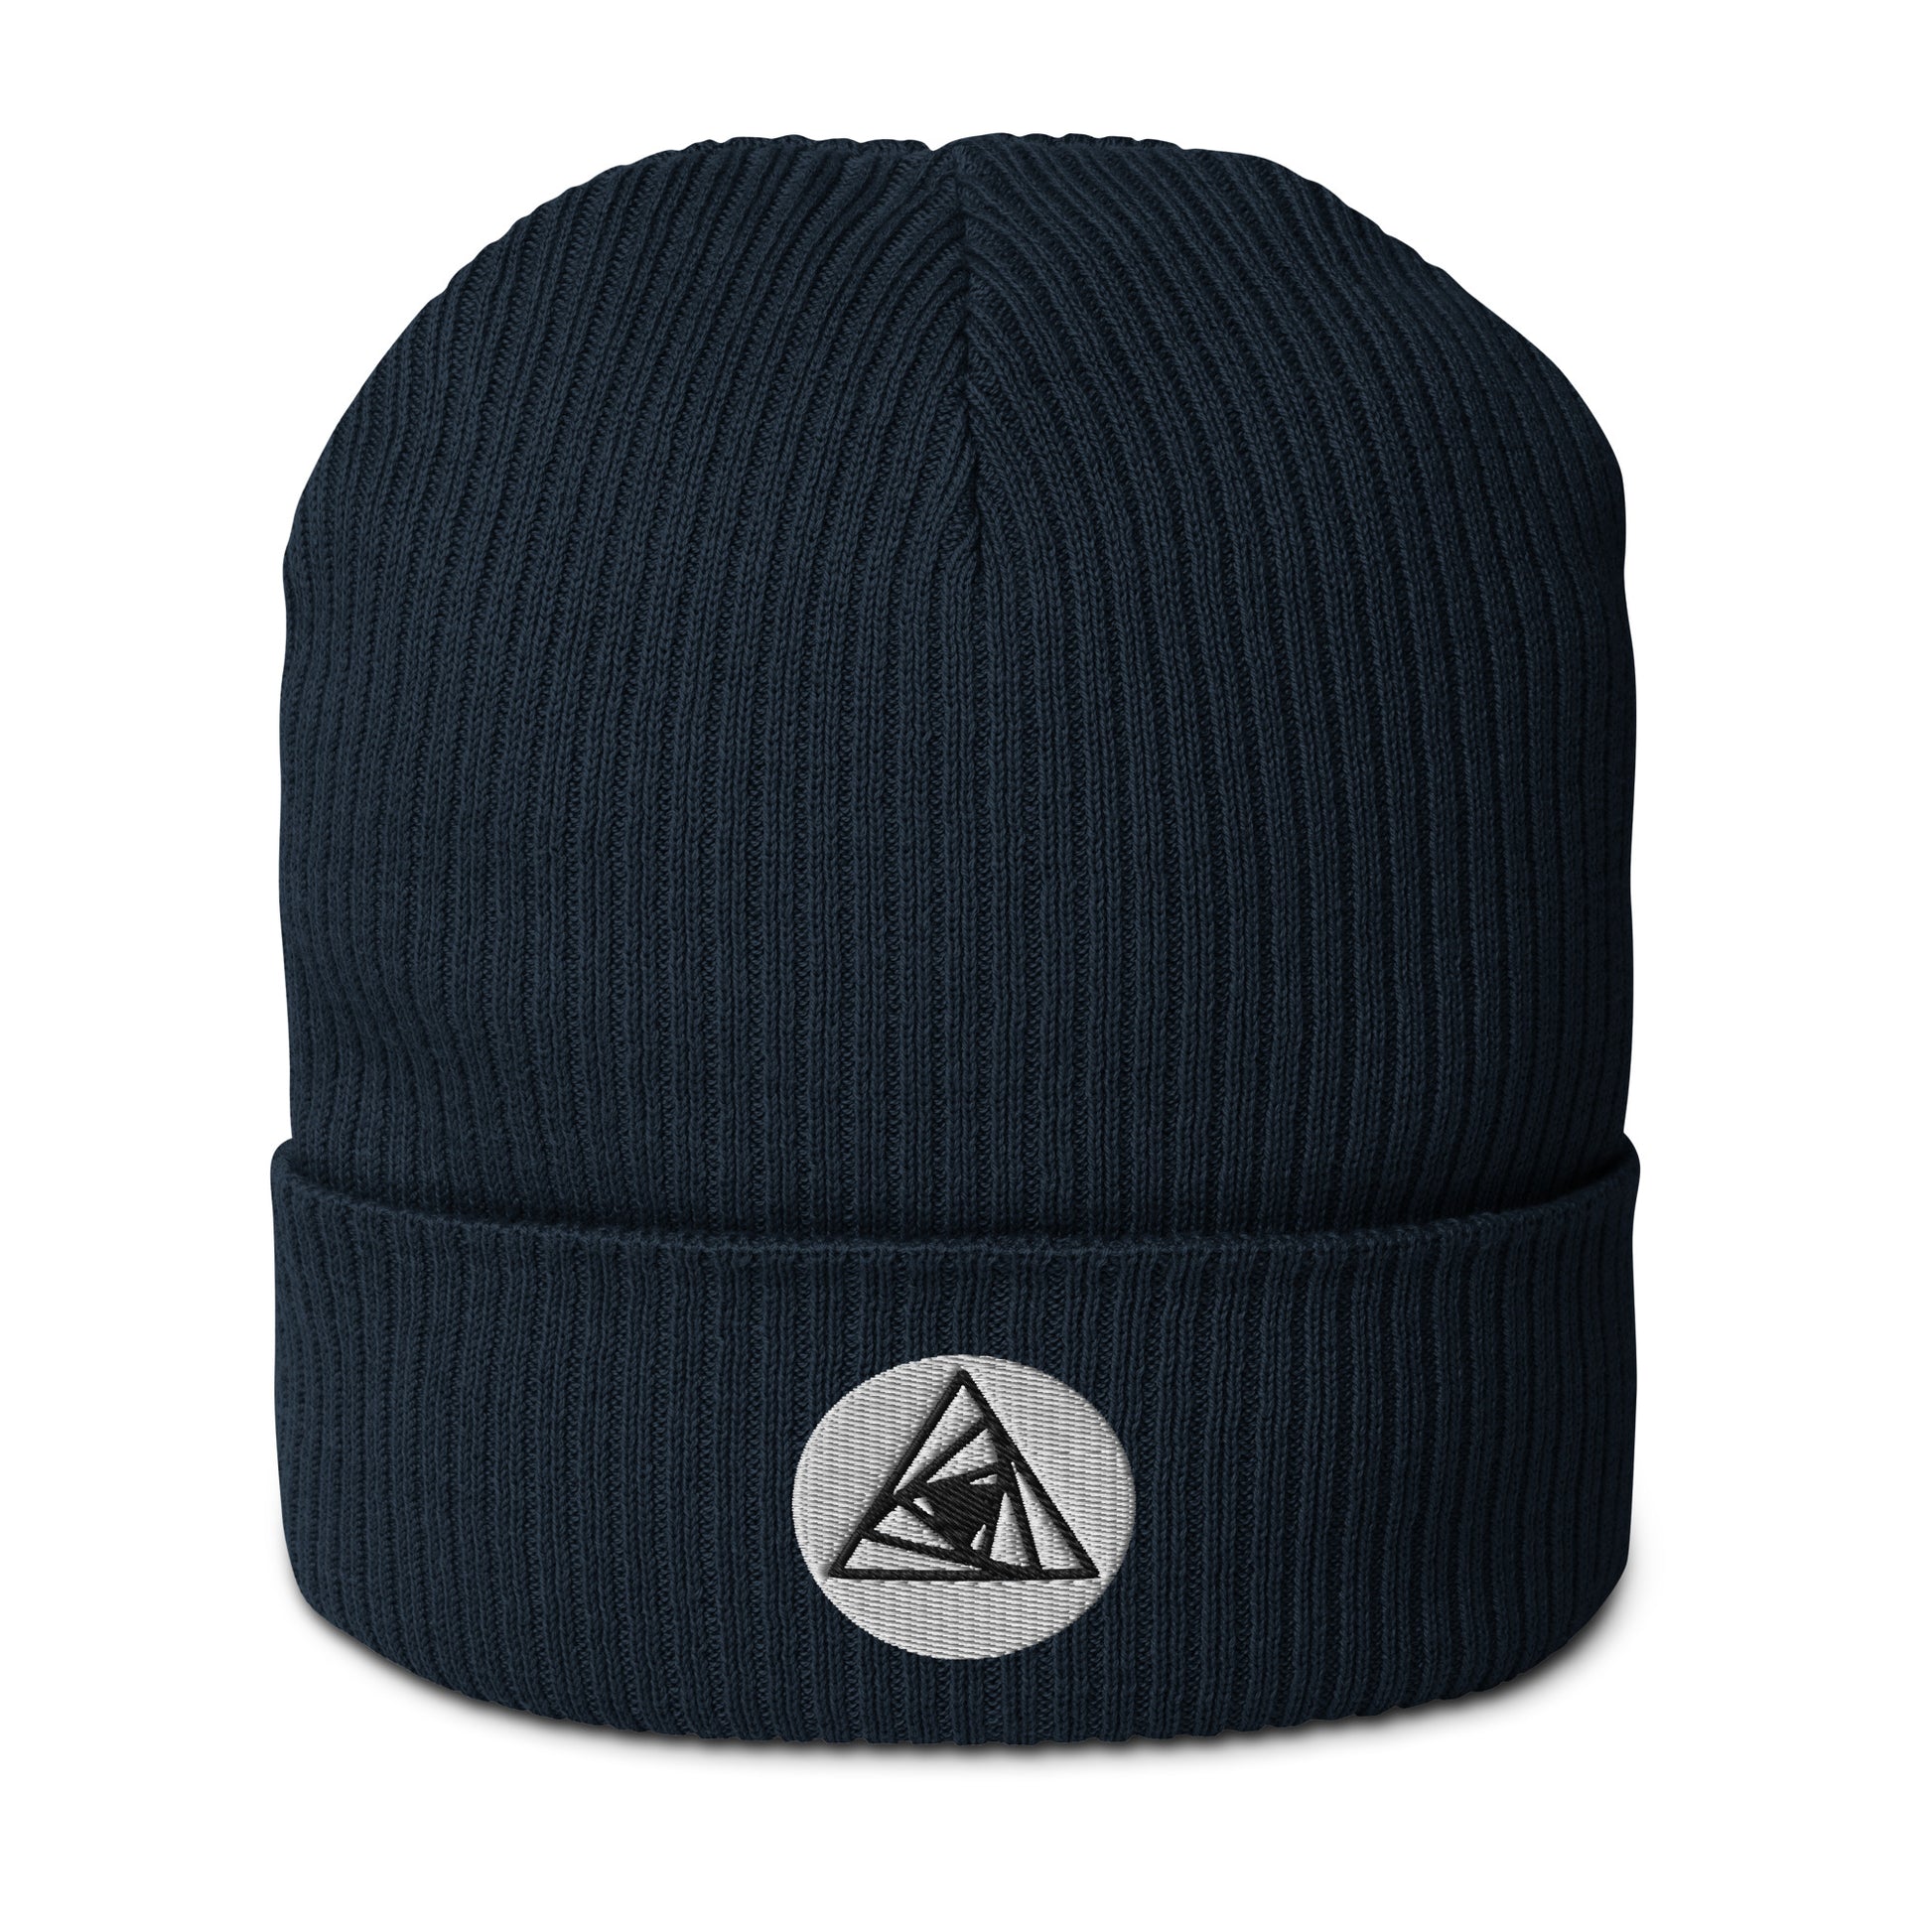 Behold, our Spiraling Equilateral Triangles Beanie in Oxford Navy—a garment of cosmic significance. Crafted from organic cotton and adorned with a mesmerizing Spiraling Equilateral Triangles embroidery, it's not your run-of-the-mill hat. 